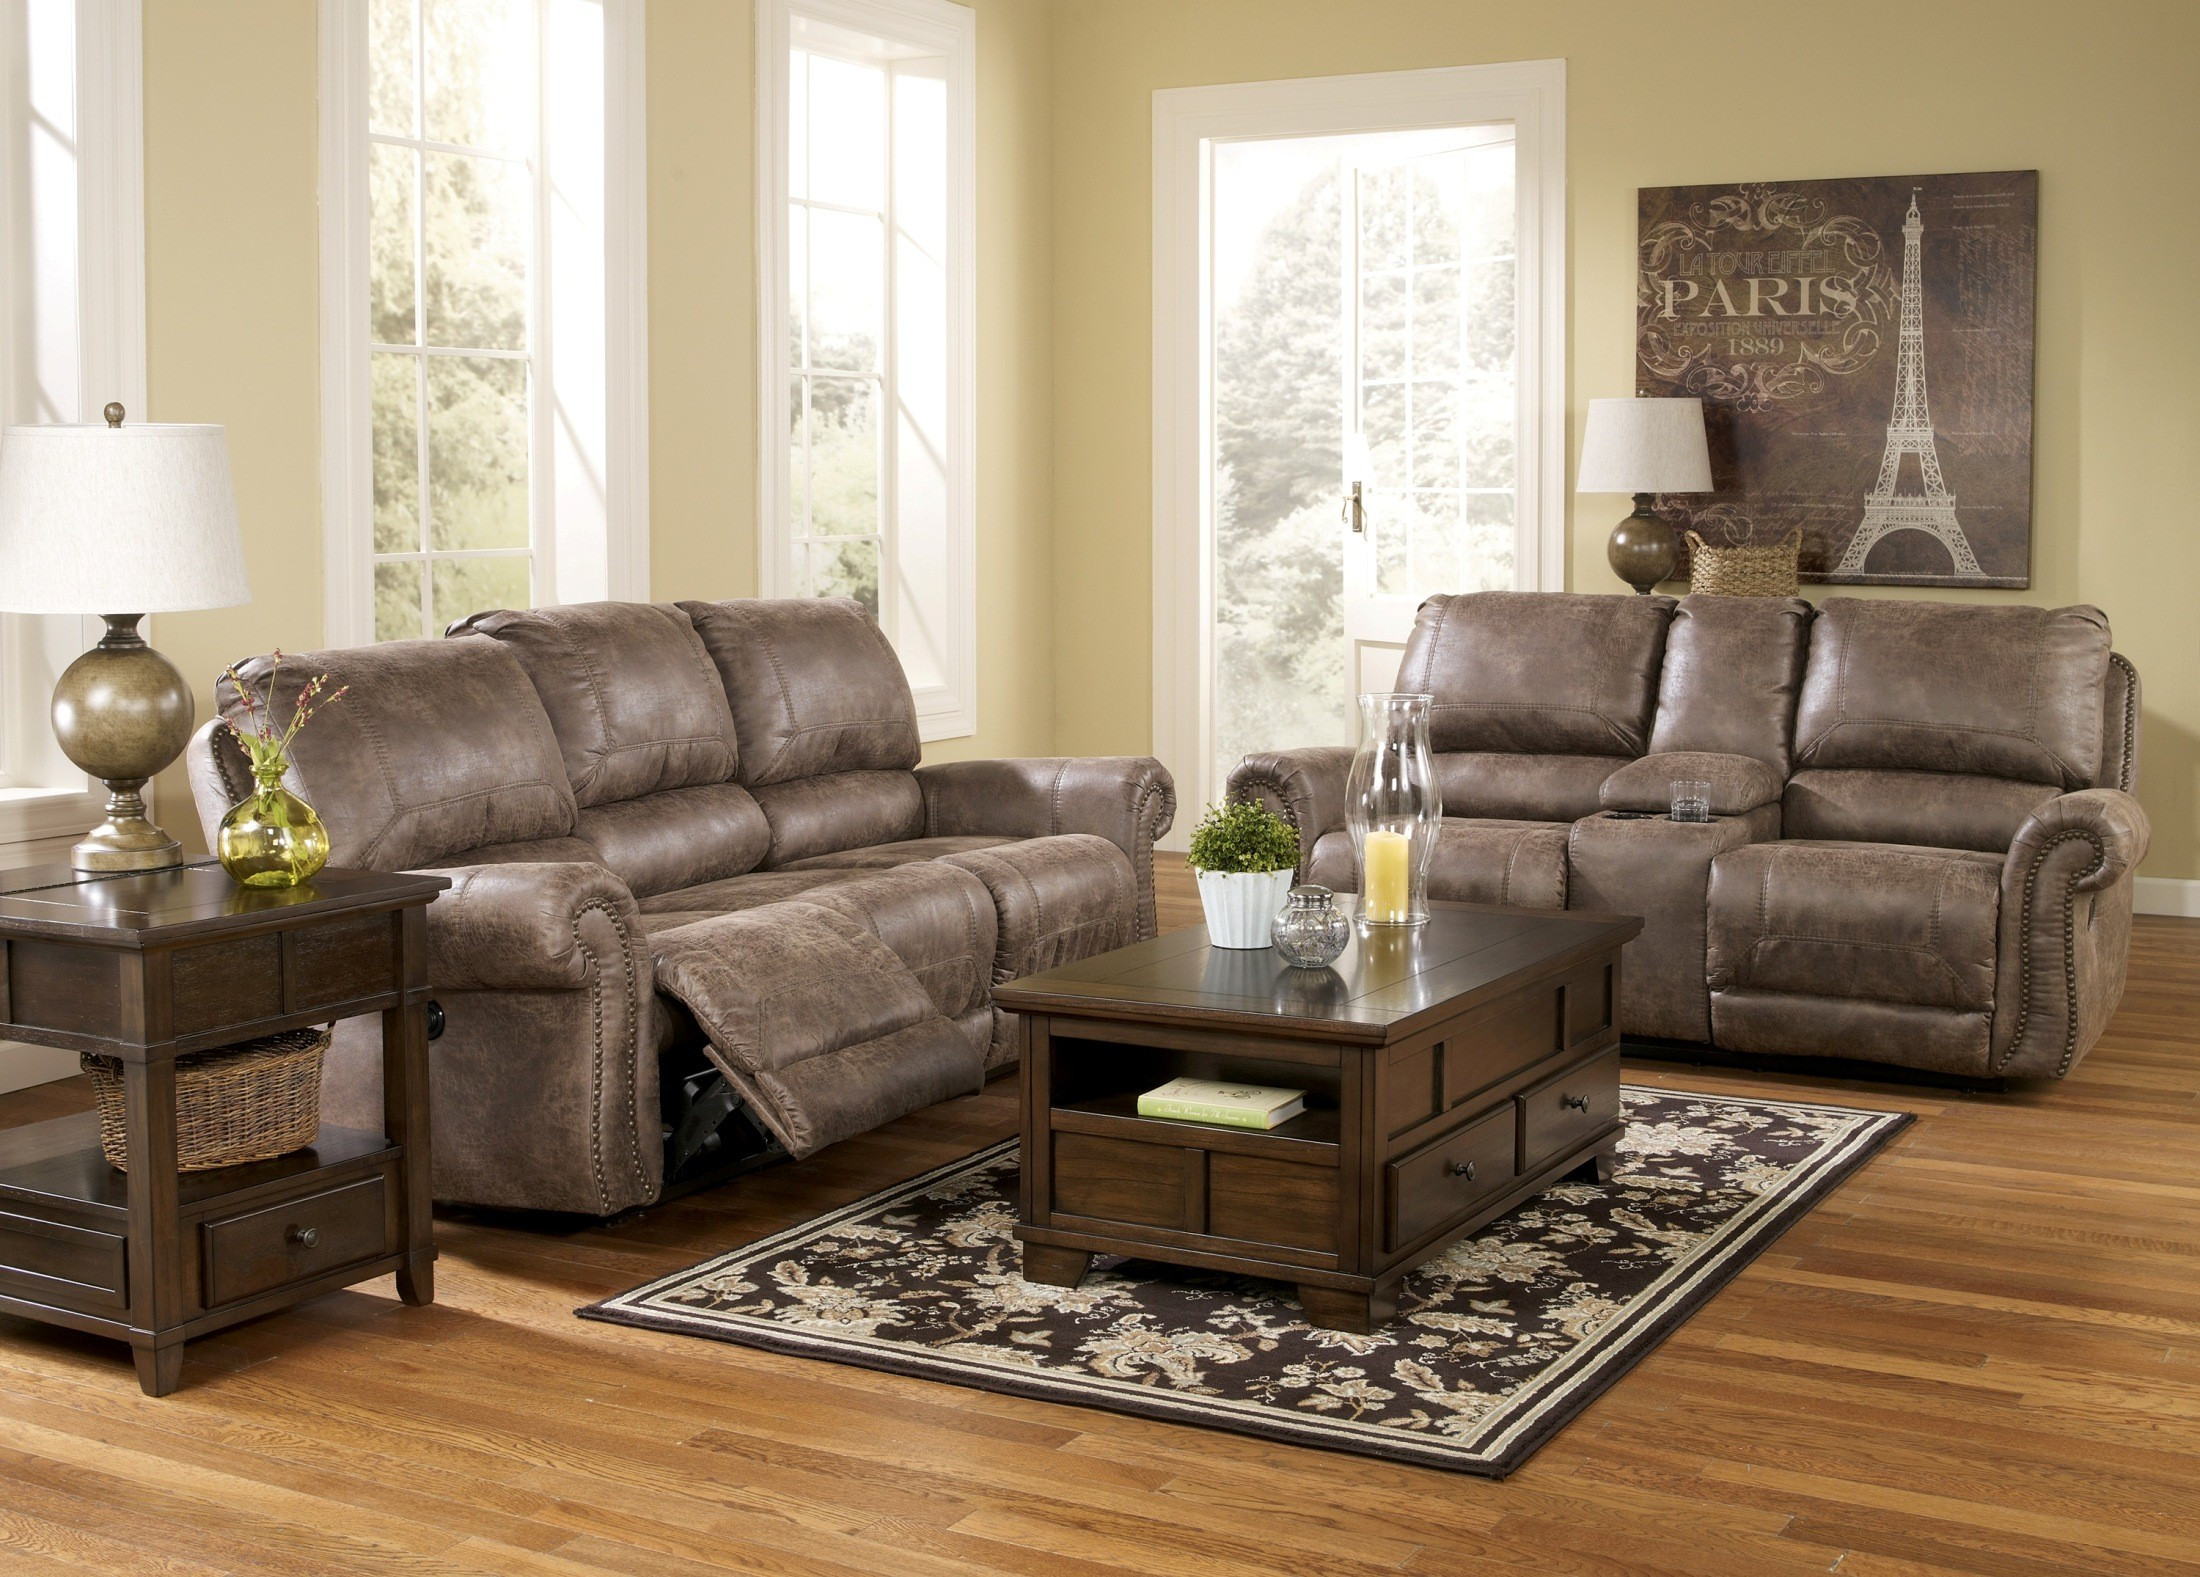 Living Room Recliner Chairs
 Oberson Gunsmoke Reclining Living Room Set from Ashley